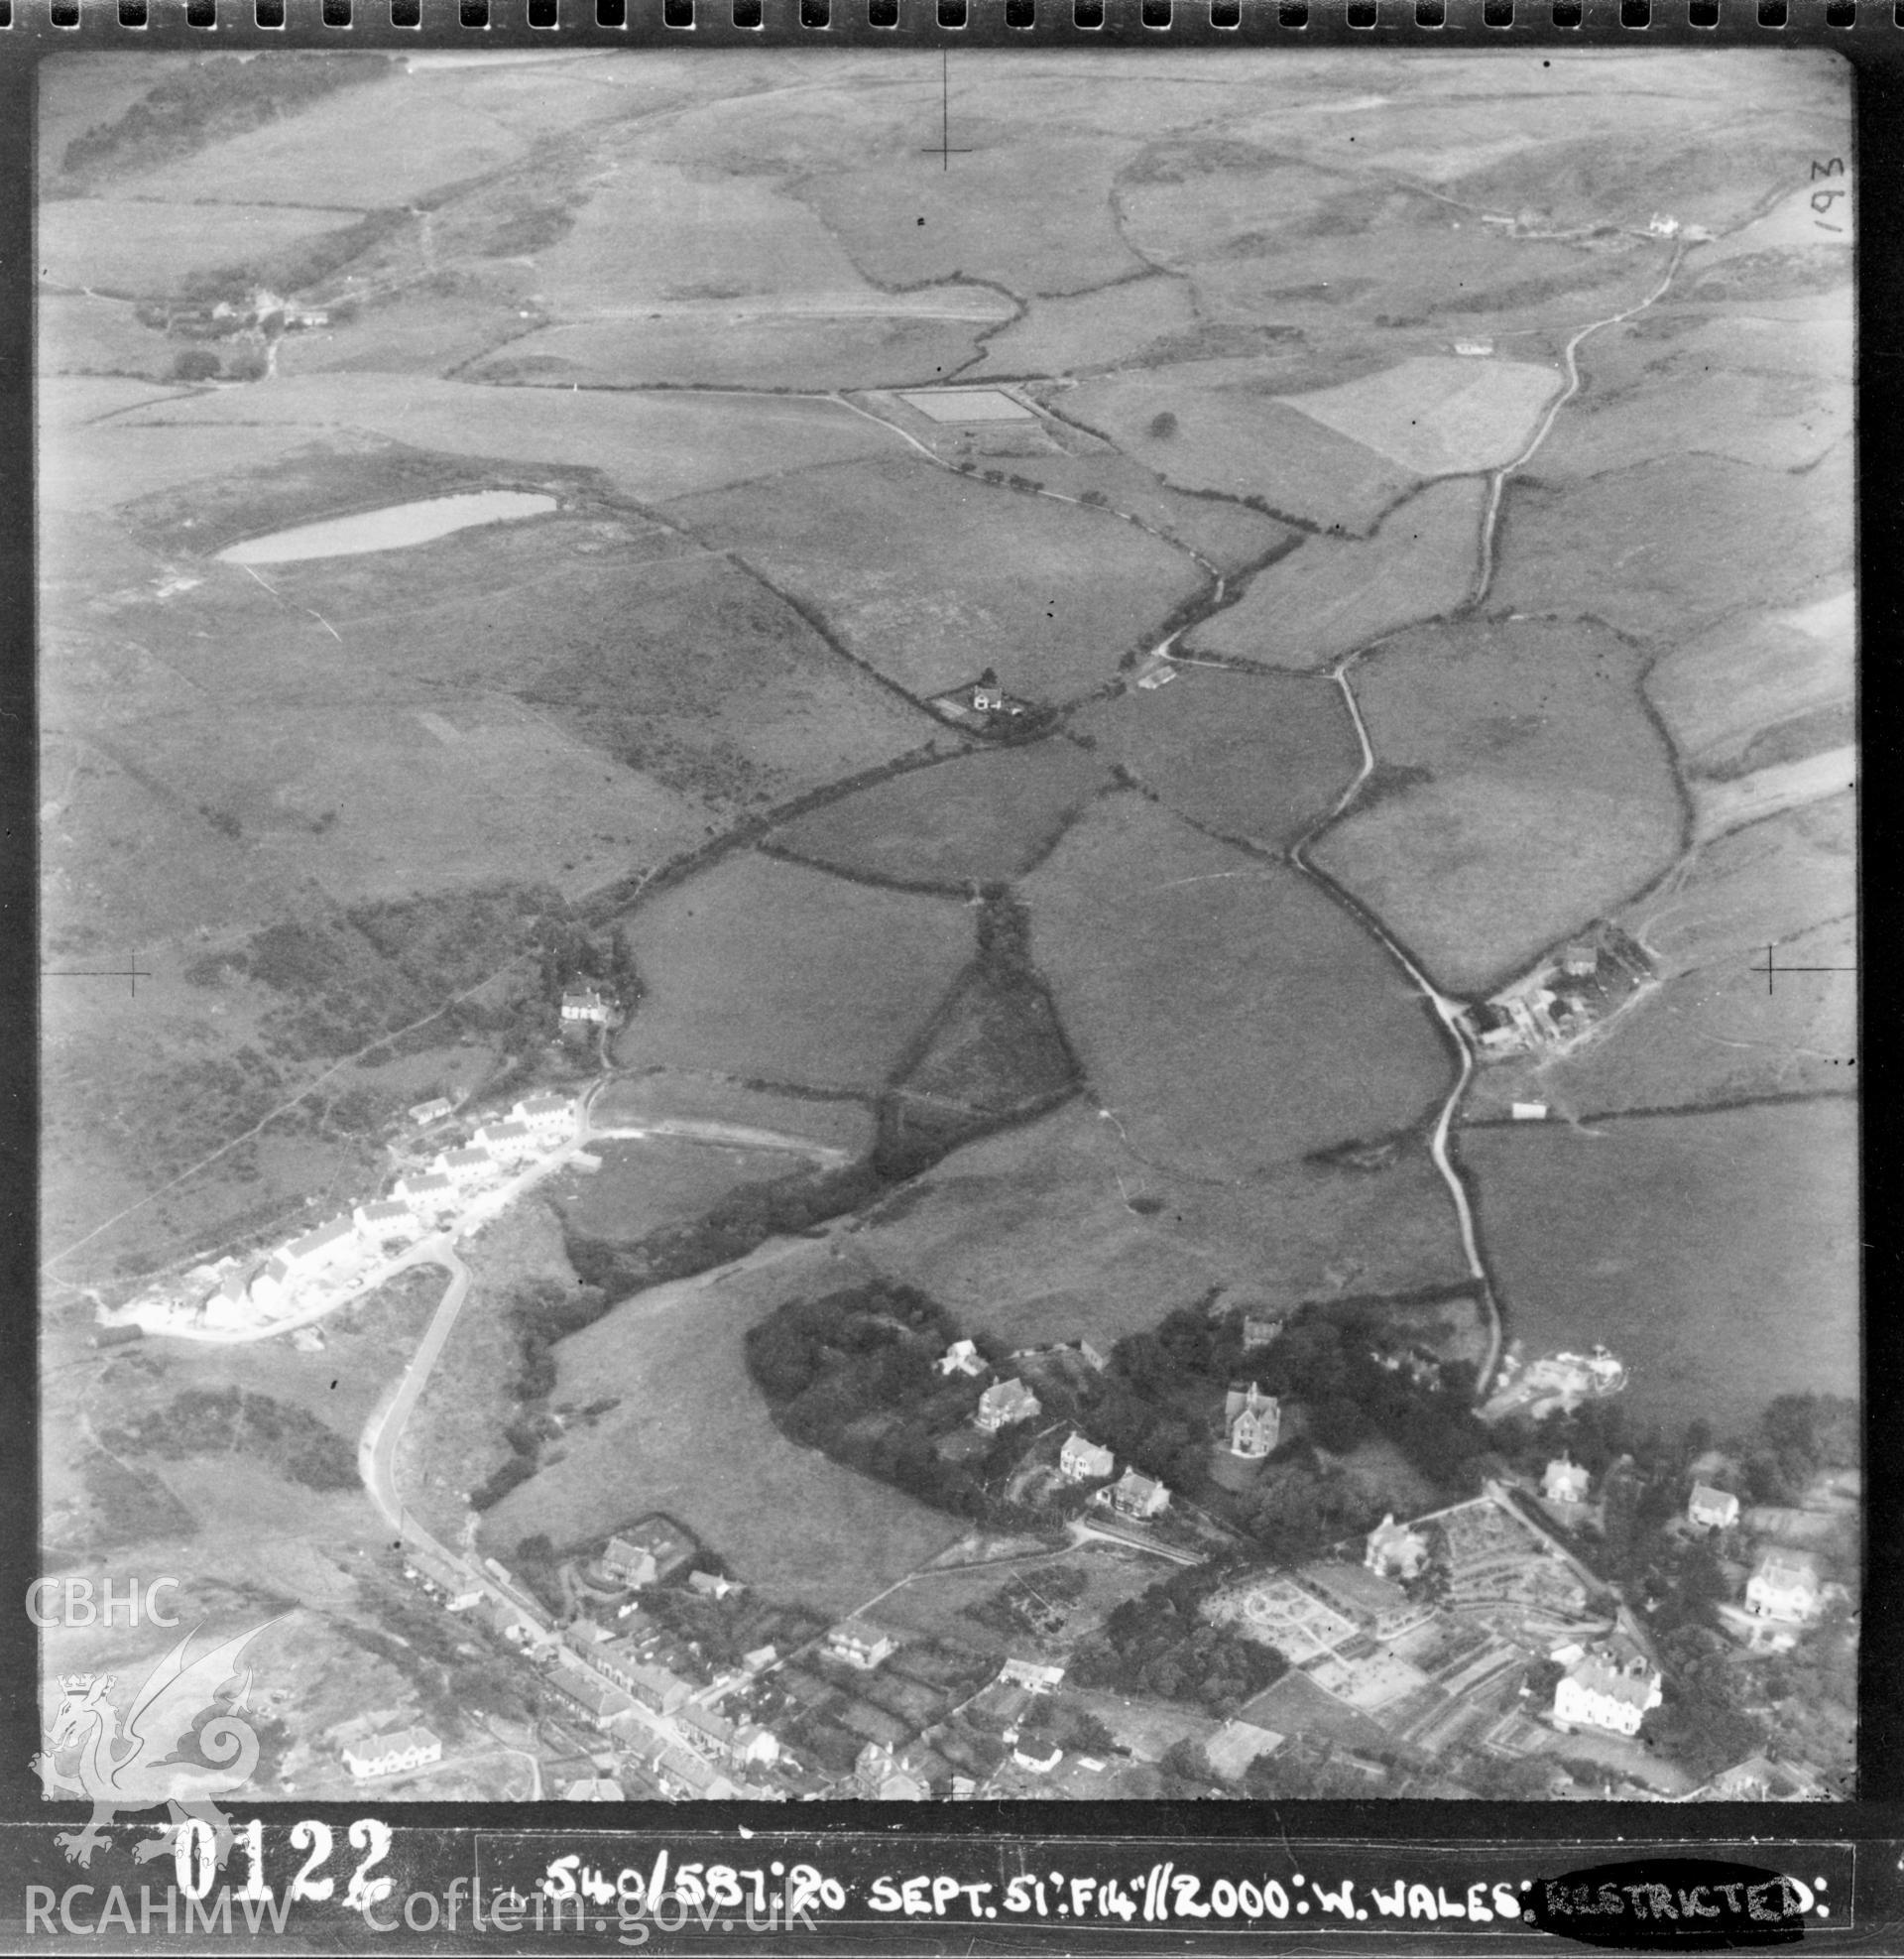 Black and white vertical aerial photograph on the Aberdyfi area taken by the RAF on 20/09/1951.